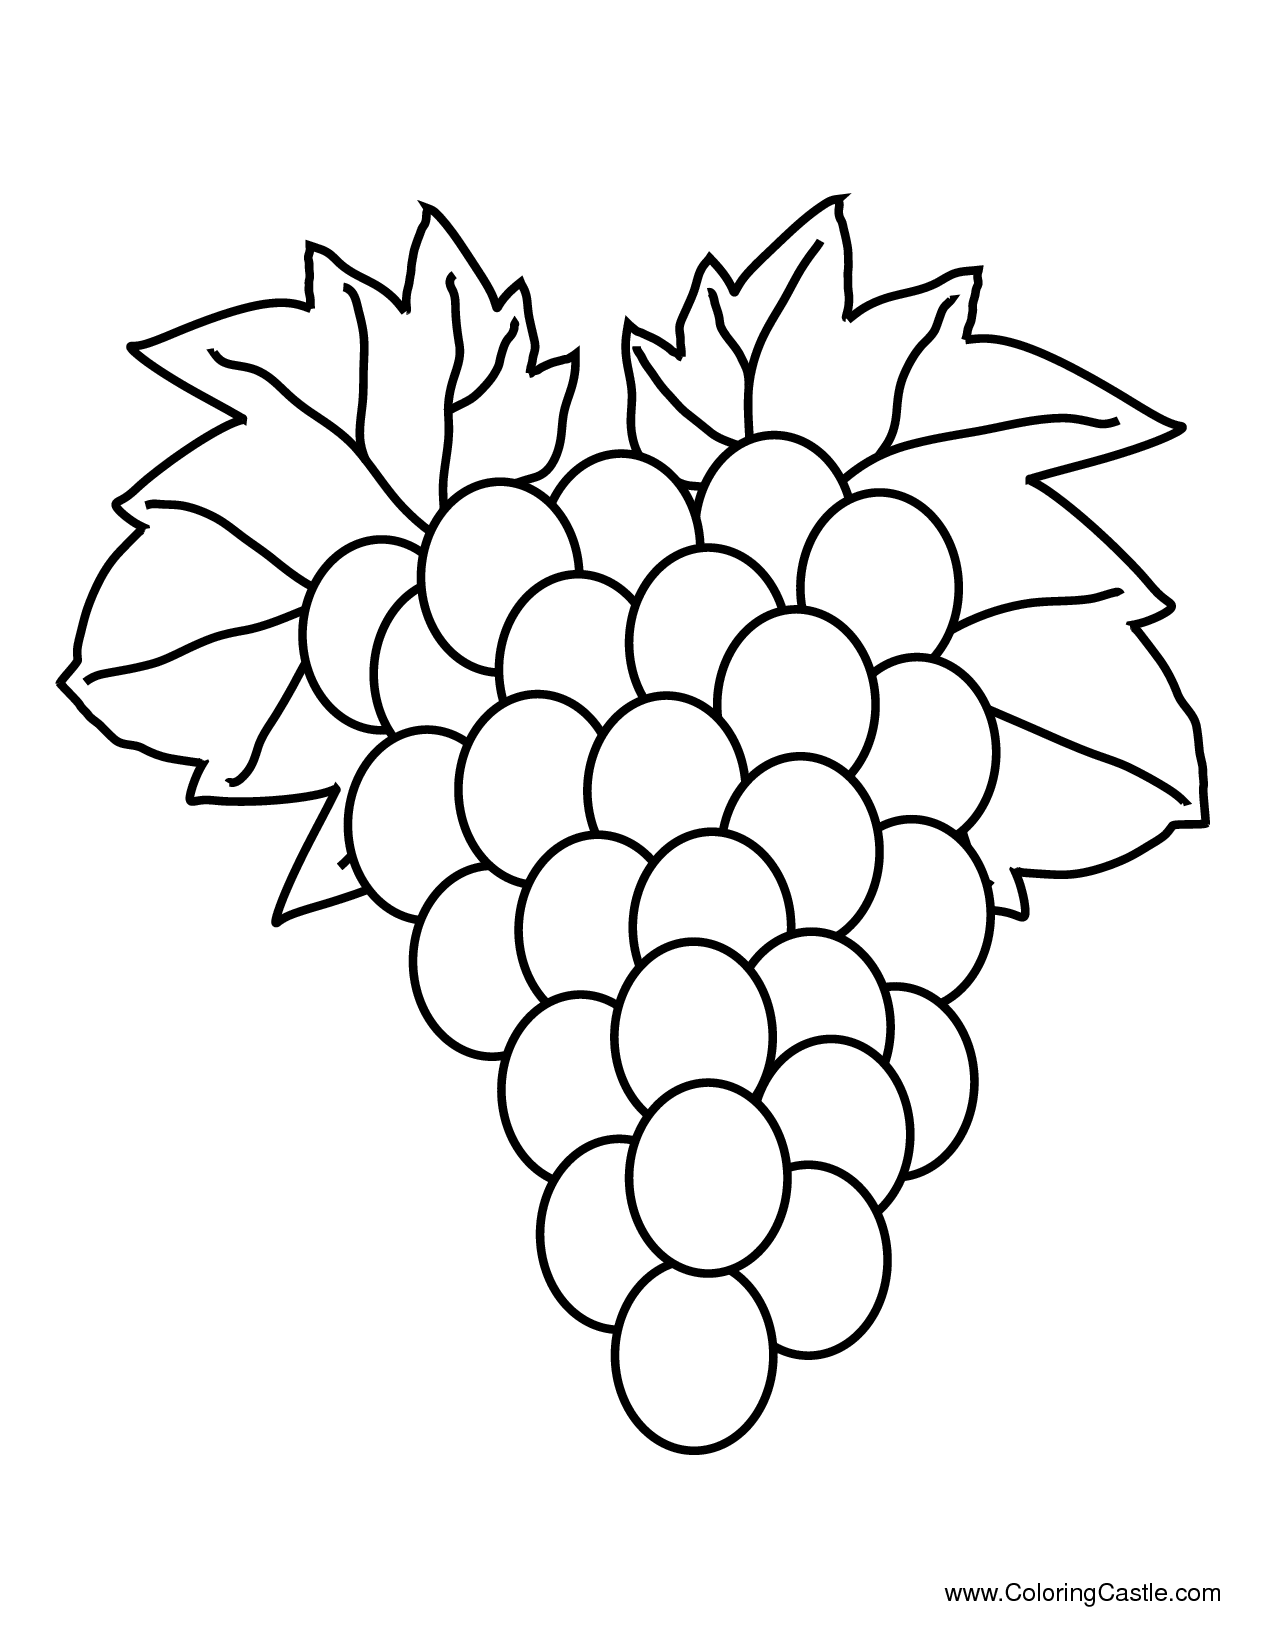 4-best-images-of-grapes-template-printable-grape-template-coloring-page-grape-template